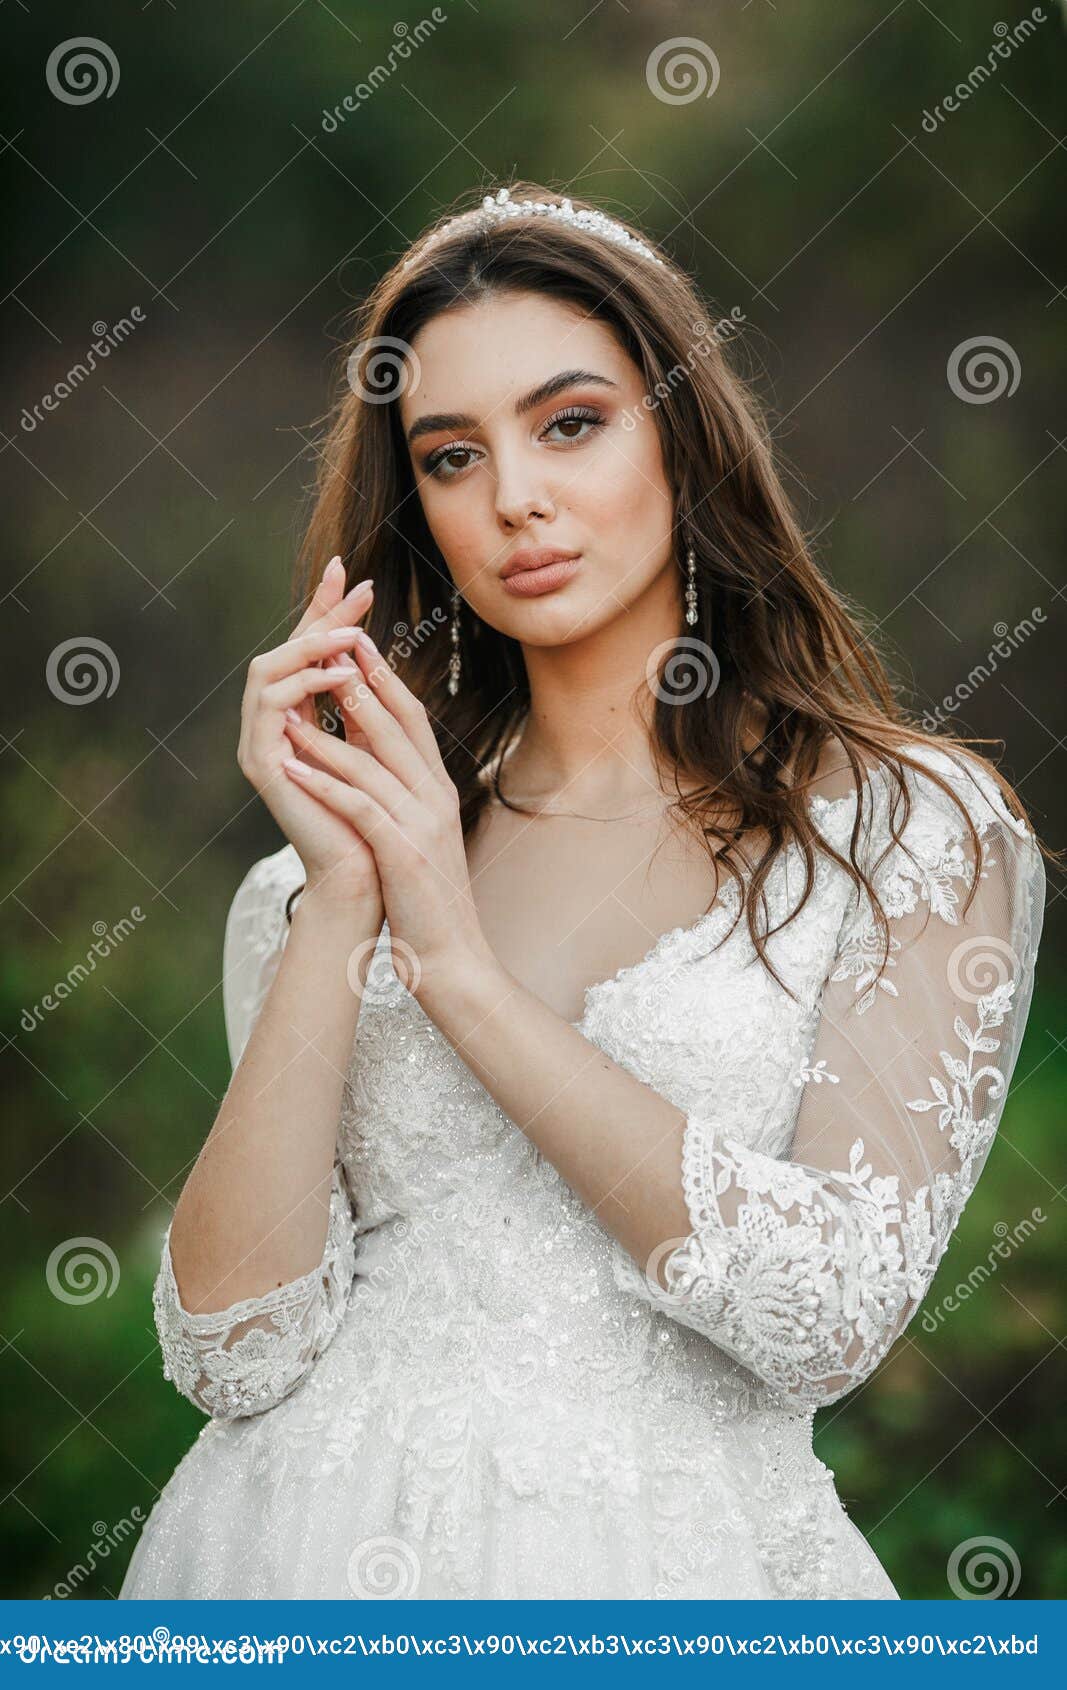 A Young Cute Girl in a White Dress Poses Beautifully. Positive Attitude  Stock Image - Image of decoration, happy: 244208751